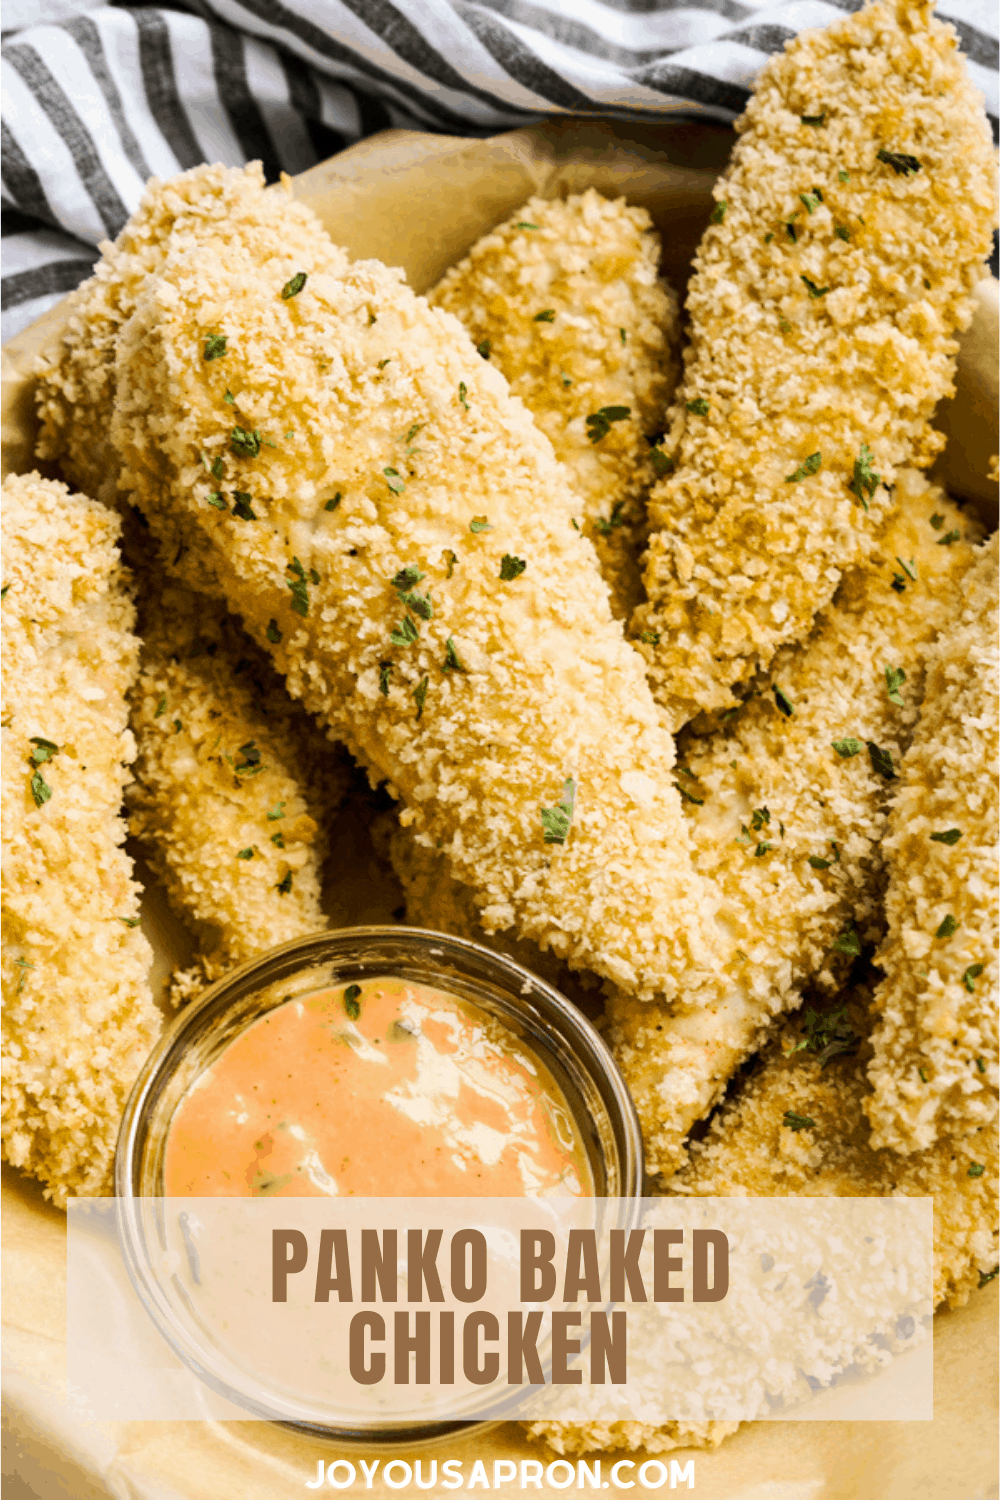 Panko Baked Chicken - crispy panko breaded chicken tenders that is flavorful, easy to make and much healthier than fried! A quick and delicious option for busy weeknights! Kid friendly. via @joyousapron